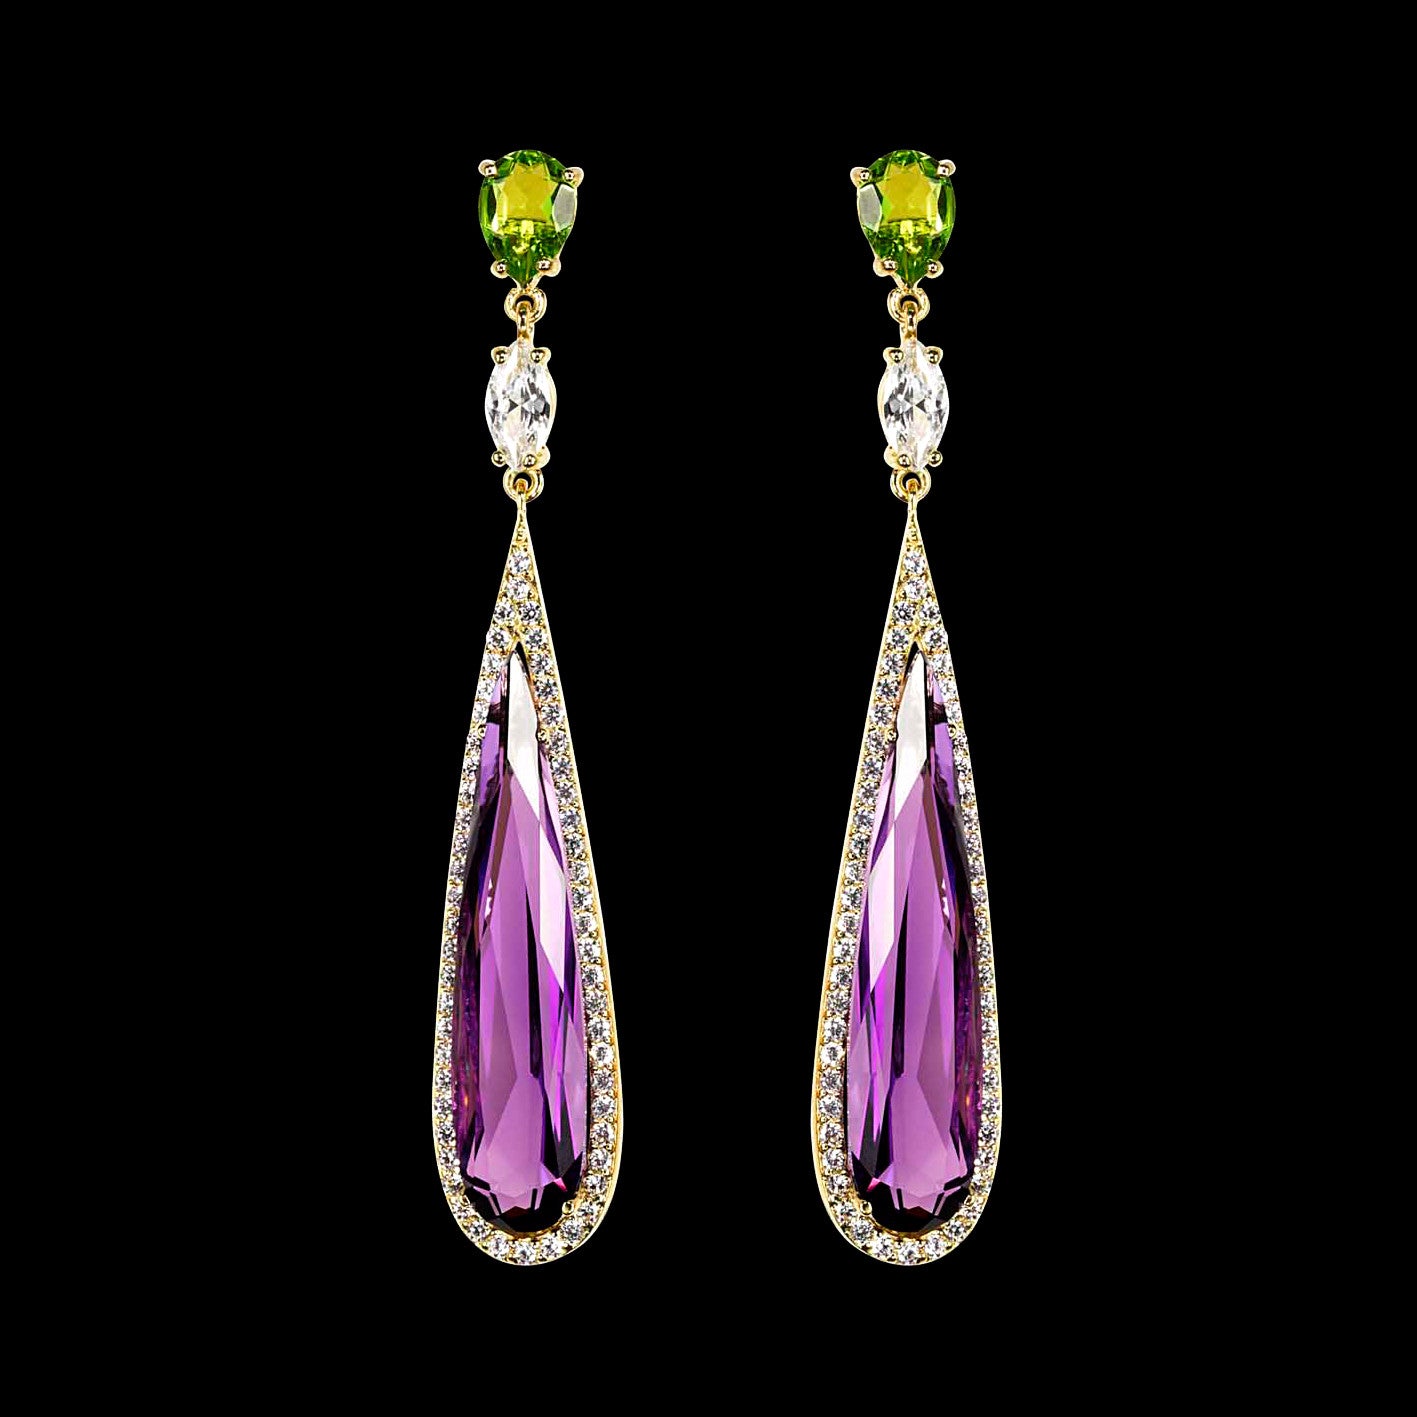 Shard Amethyst Earrings, Earring, Anabela Chan Joaillerie - Fine jewelry with laboratory grown and created gemstones hand-crafted in the United Kingdom. Anabela Chan Joaillerie is the first fine jewellery brand in the world to champion laboratory-grown and created gemstones with high jewellery design, artisanal craftsmanship and a focus on ethical and sustainable innovations.